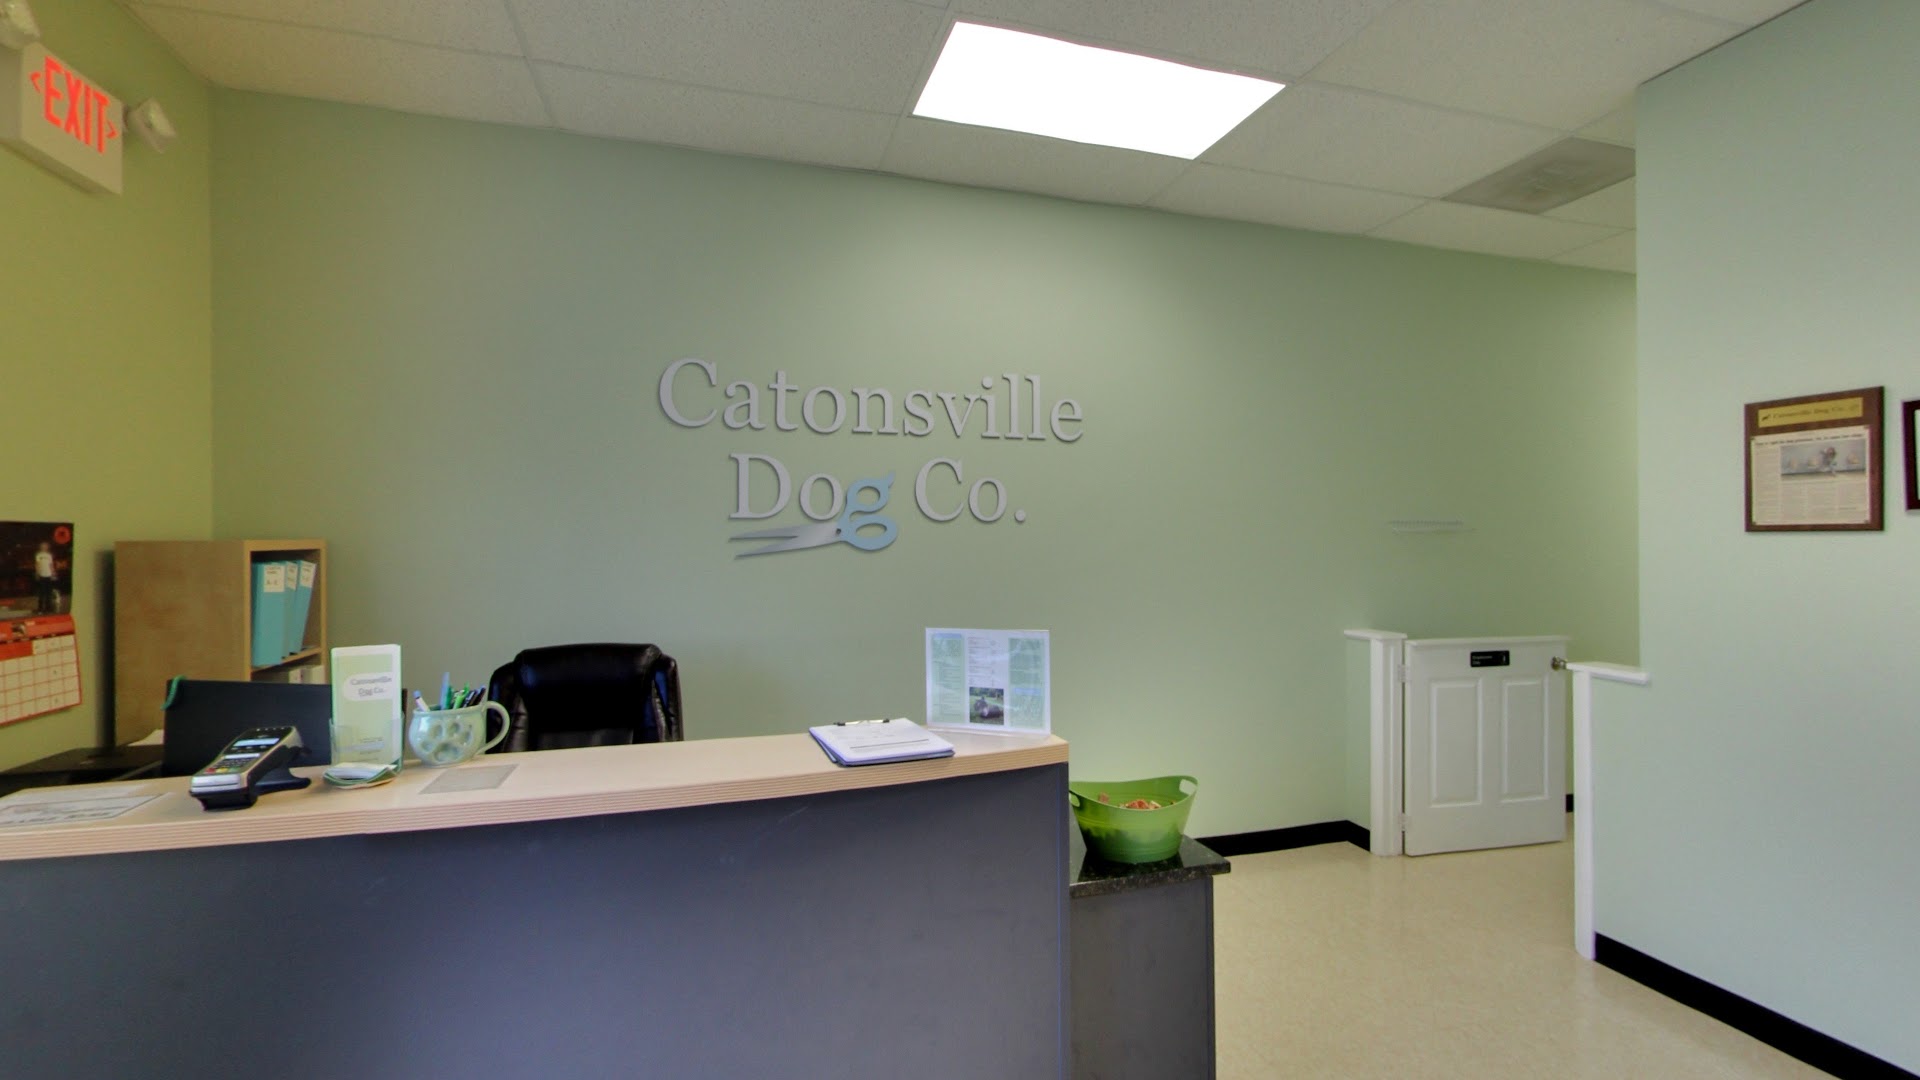 Catonsville Dog Co